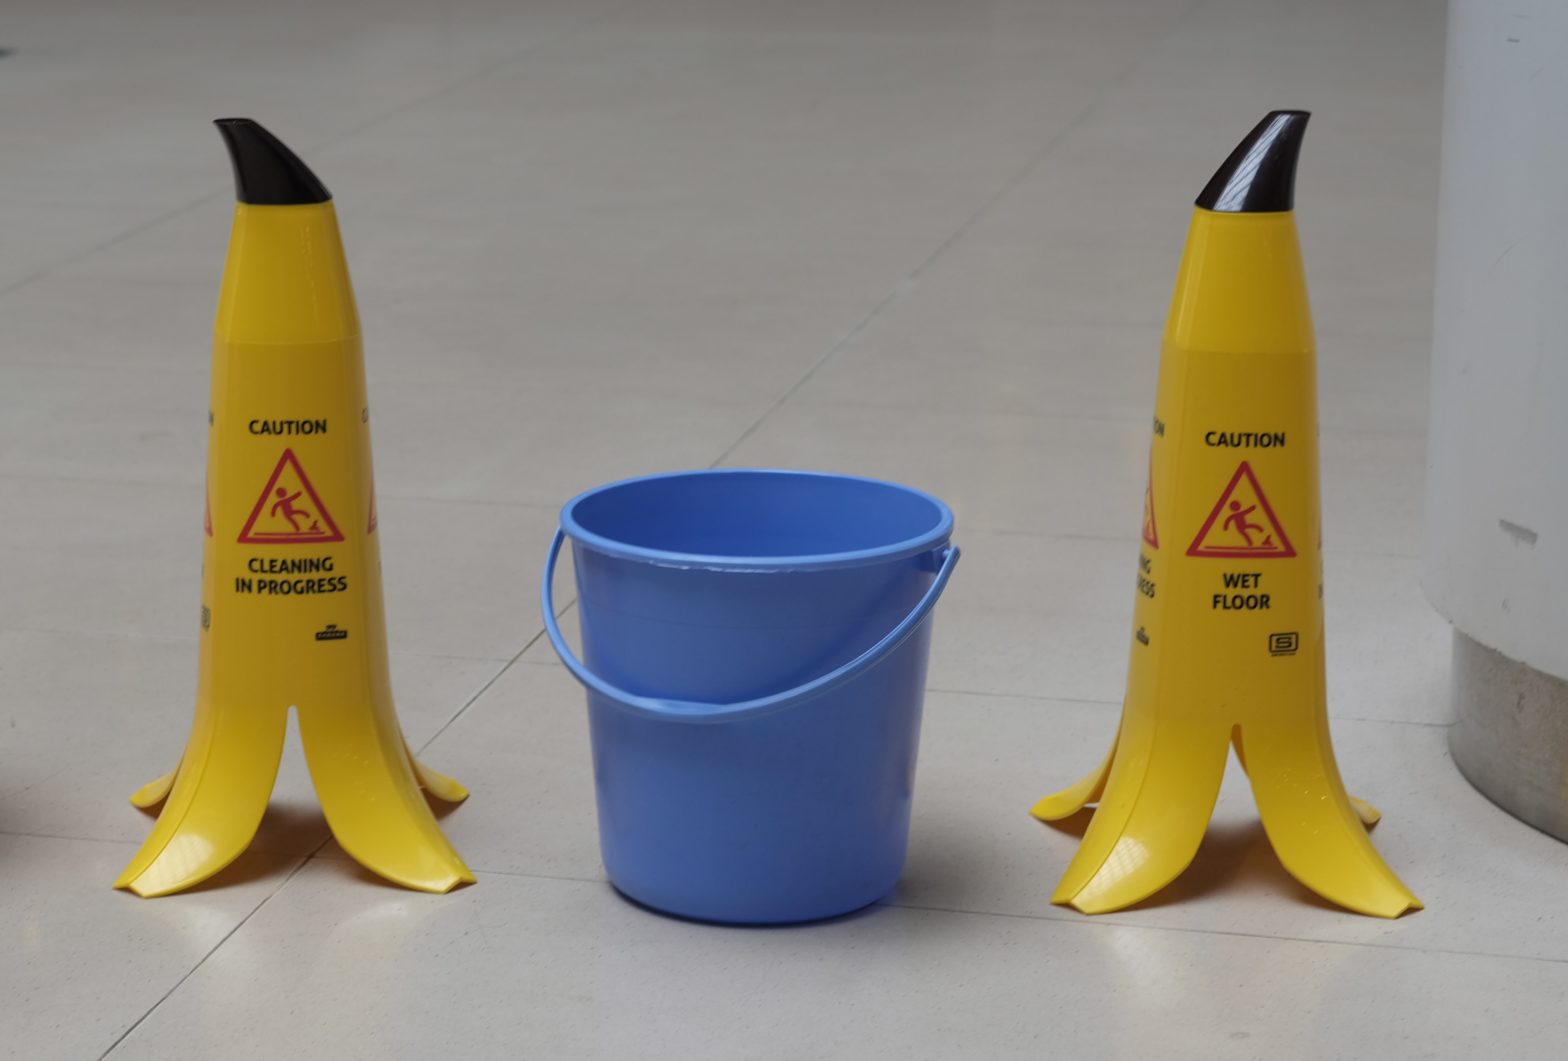 Slippery floor signs next to a bucket